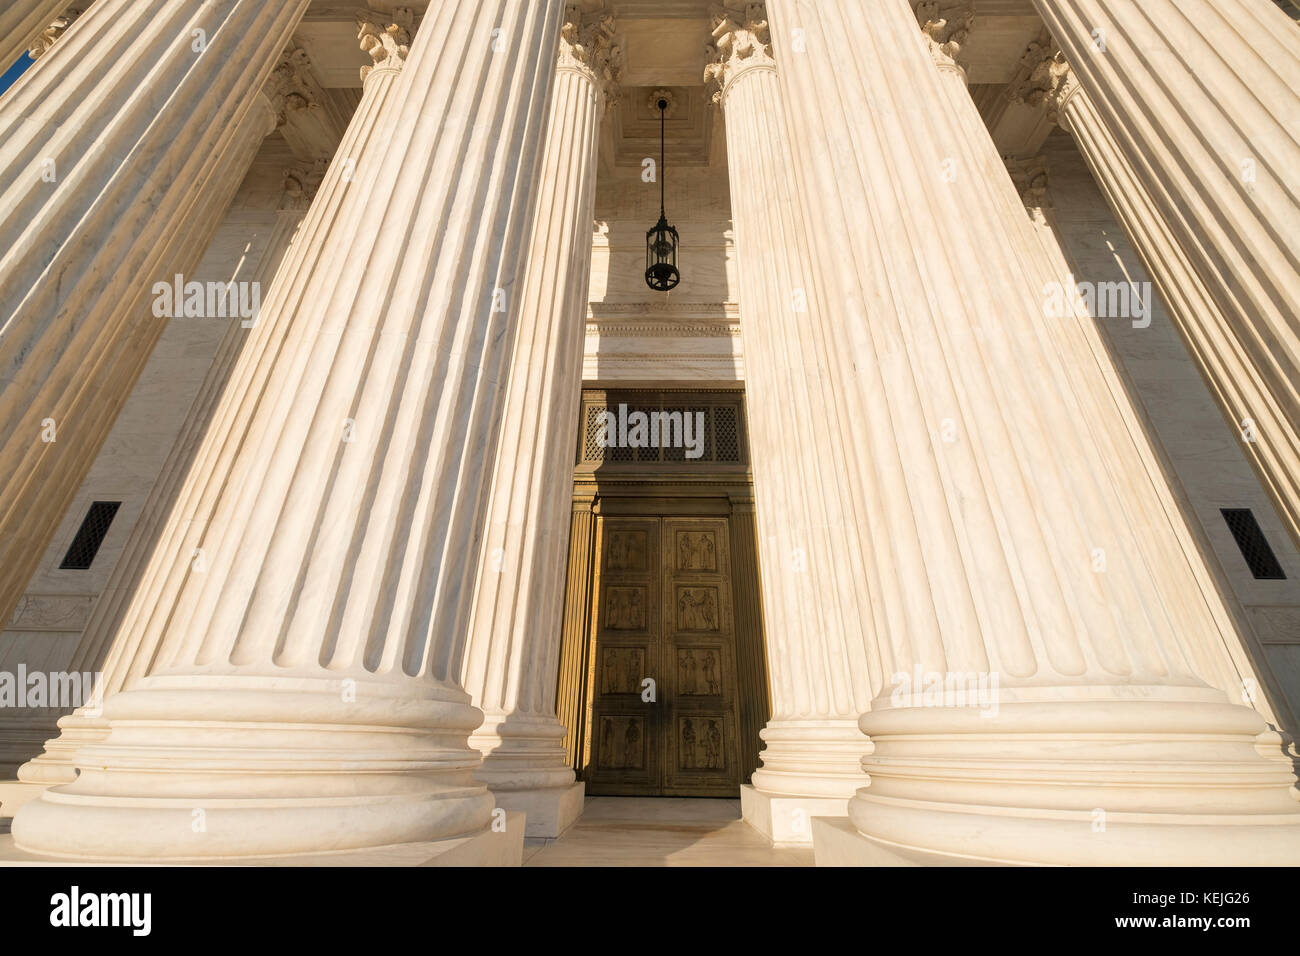 Main Doors and Entrance Pillars to the US Supreme Court Building, Capitol Hill, Washington DC, USA Stock Photo